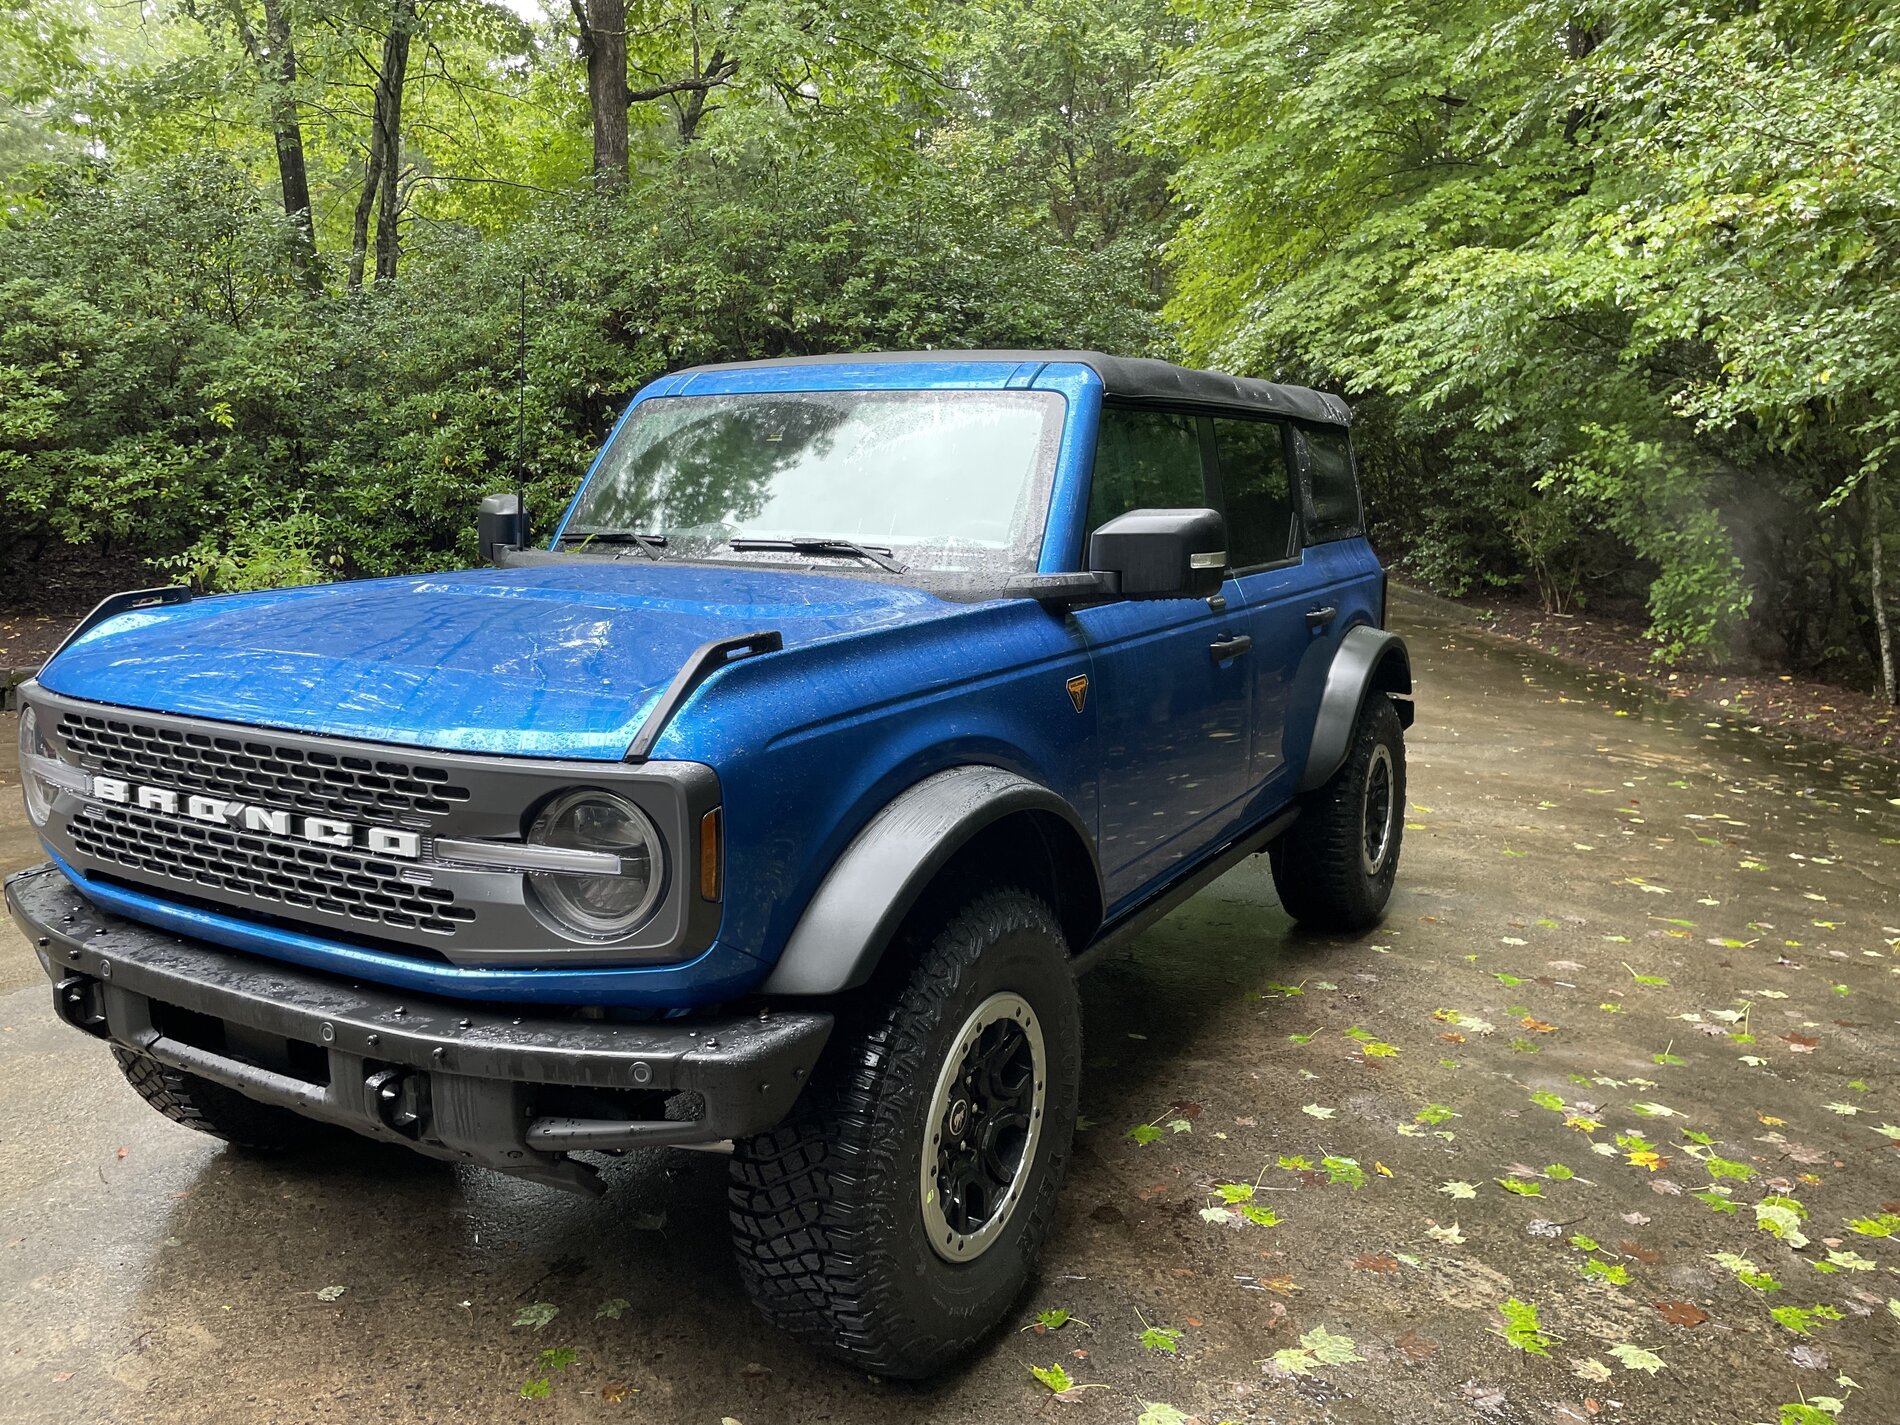 Ford Bronco Starting life with a 4dr Badlands Sasquatch - an owner's review Bronco1